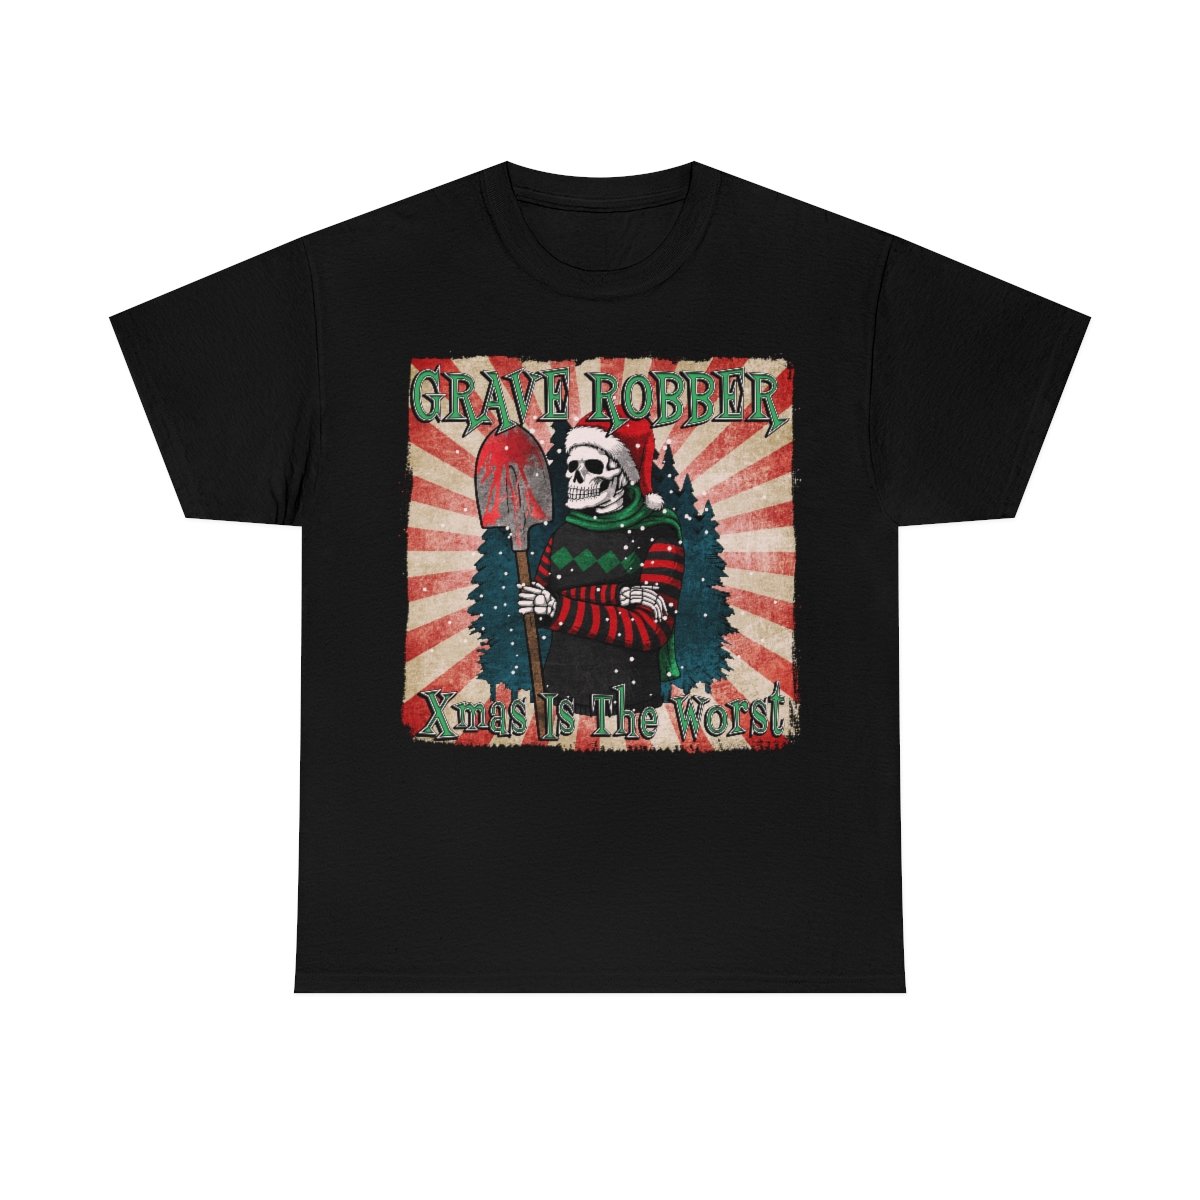 Grave Robber – Xmas Is The Worst Short Sleeve Tshirt (5000)